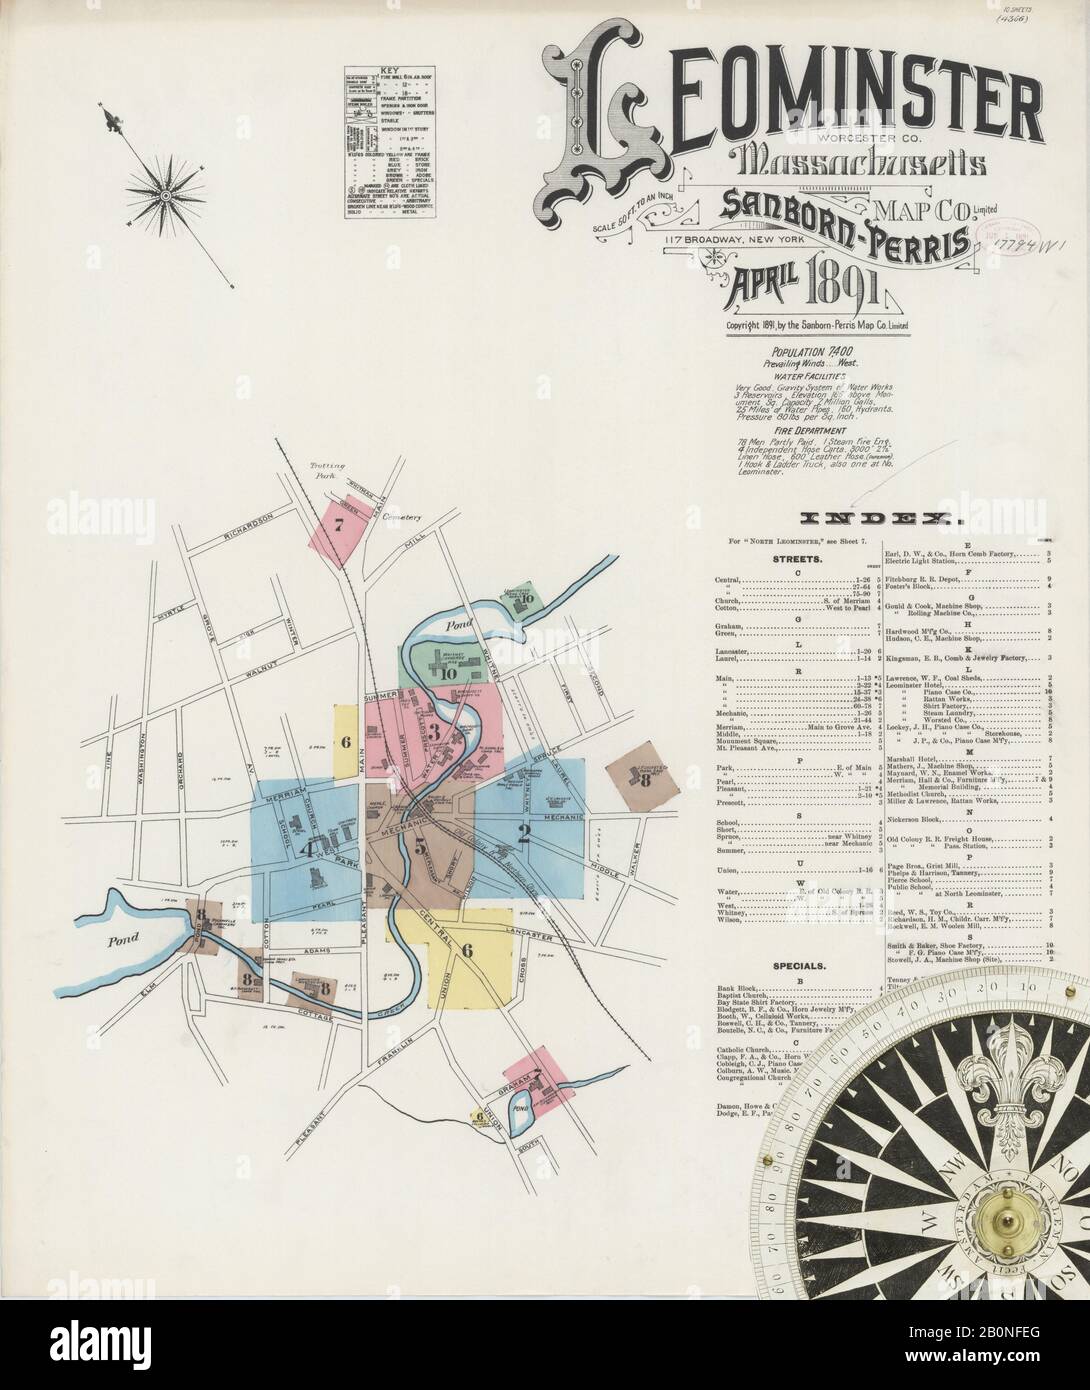 Image 1 of Sanborn Fire Insurance Map from Leominster, Worcester County, Massachusetts. Apr 1891. 10 Sheet(s), America, street map with a Nineteenth Century compass Stock Photo